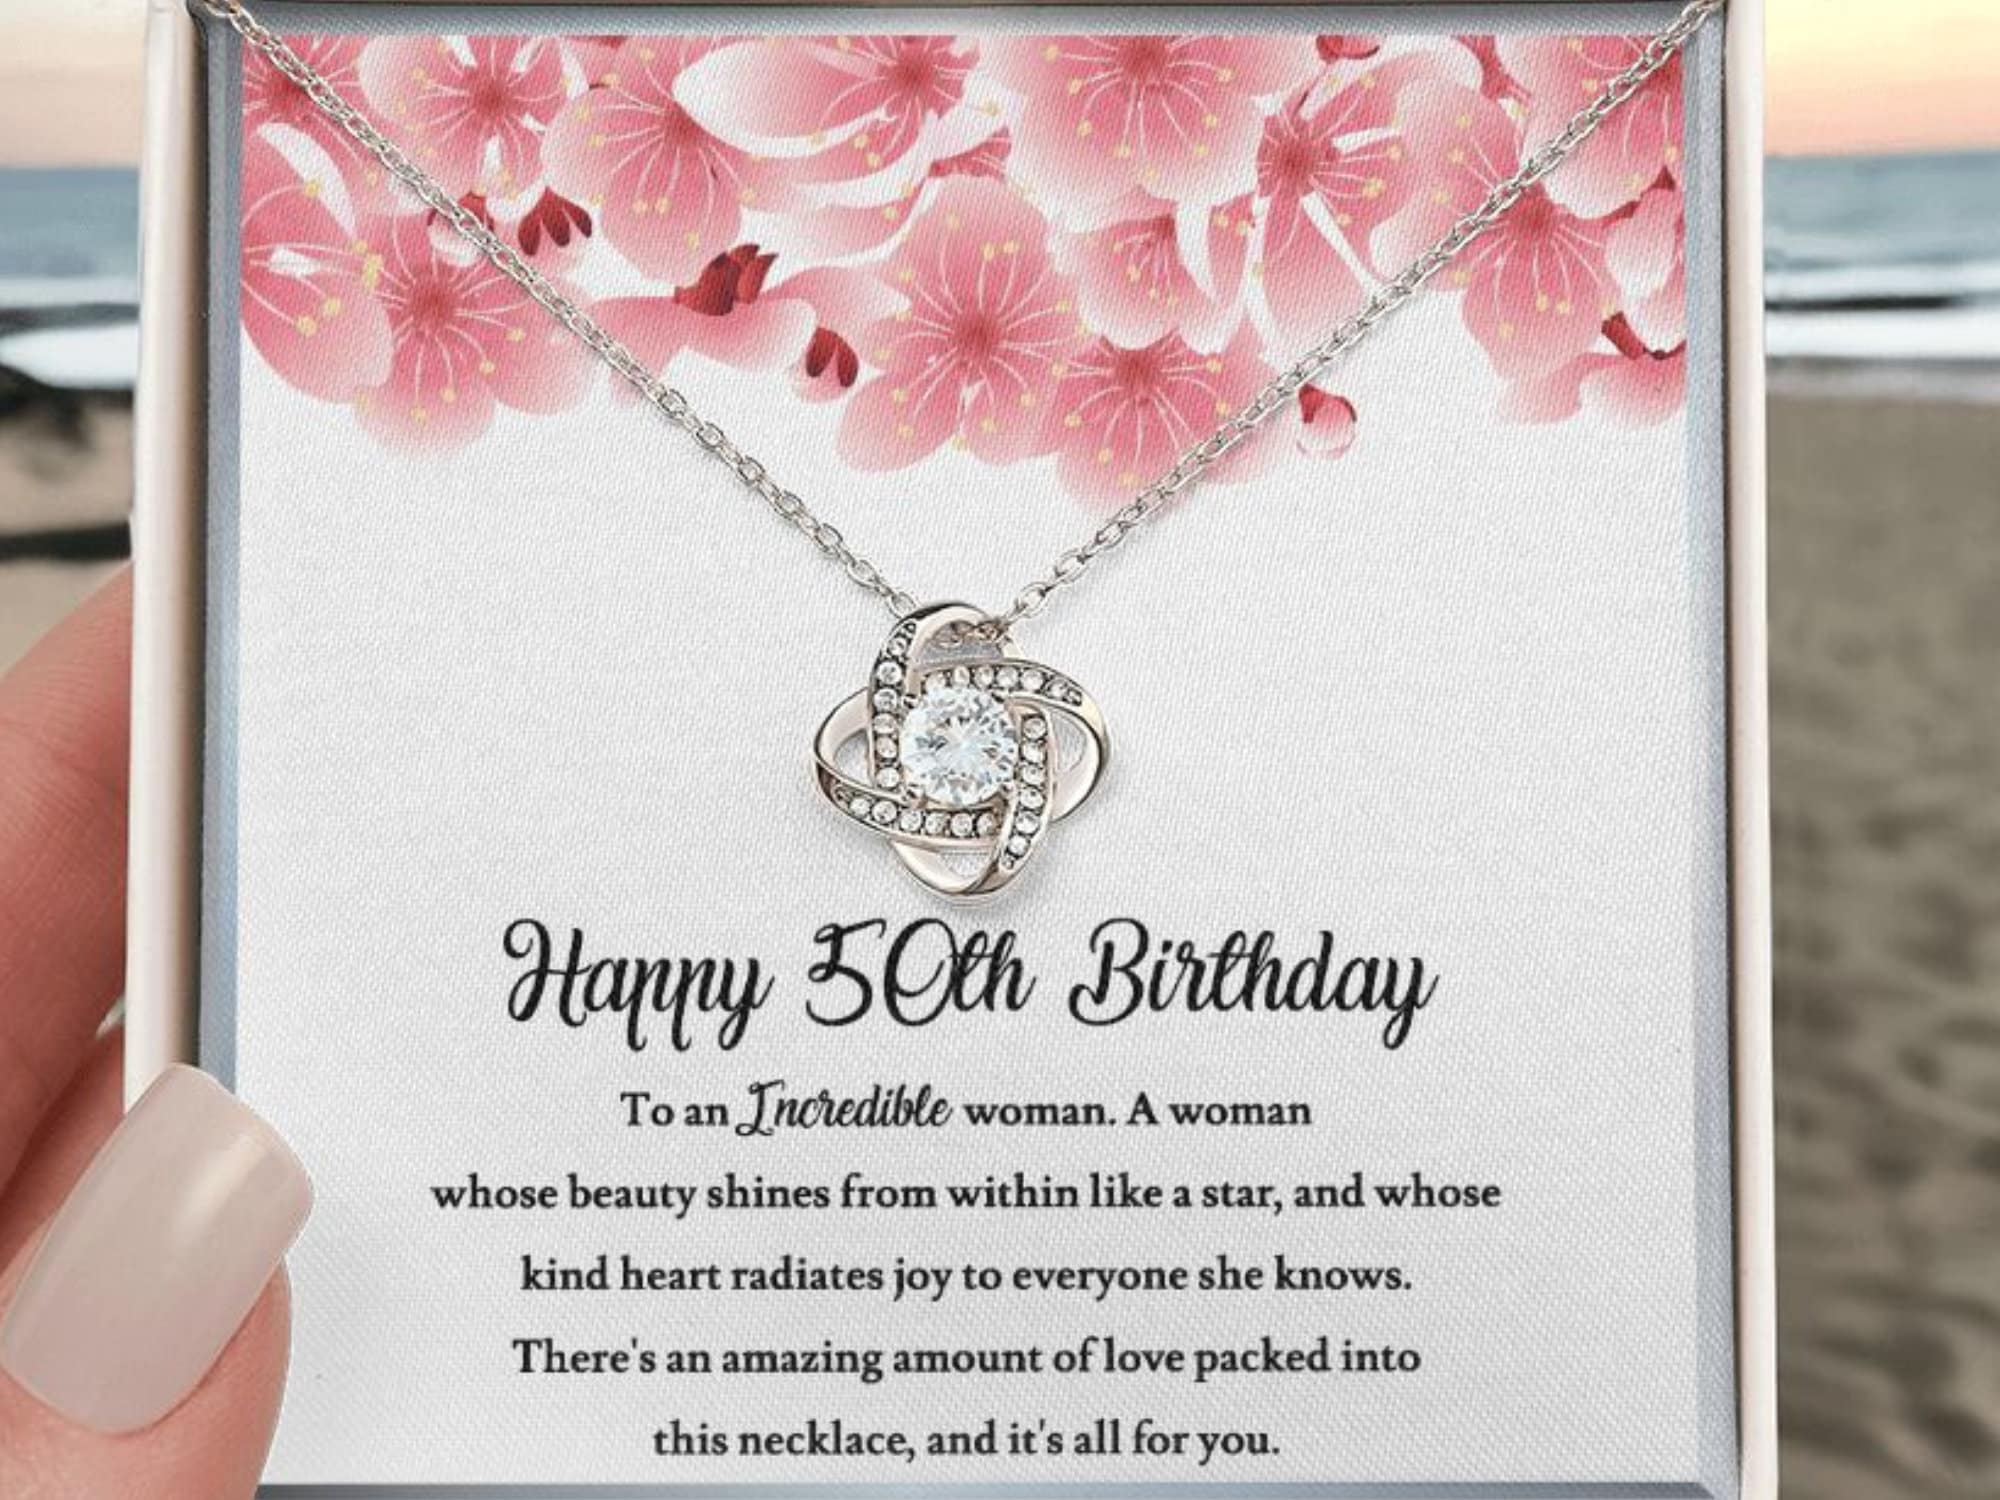 Happy 50th Birthday Jewelry Gift for a Woman Turning 50 pic image